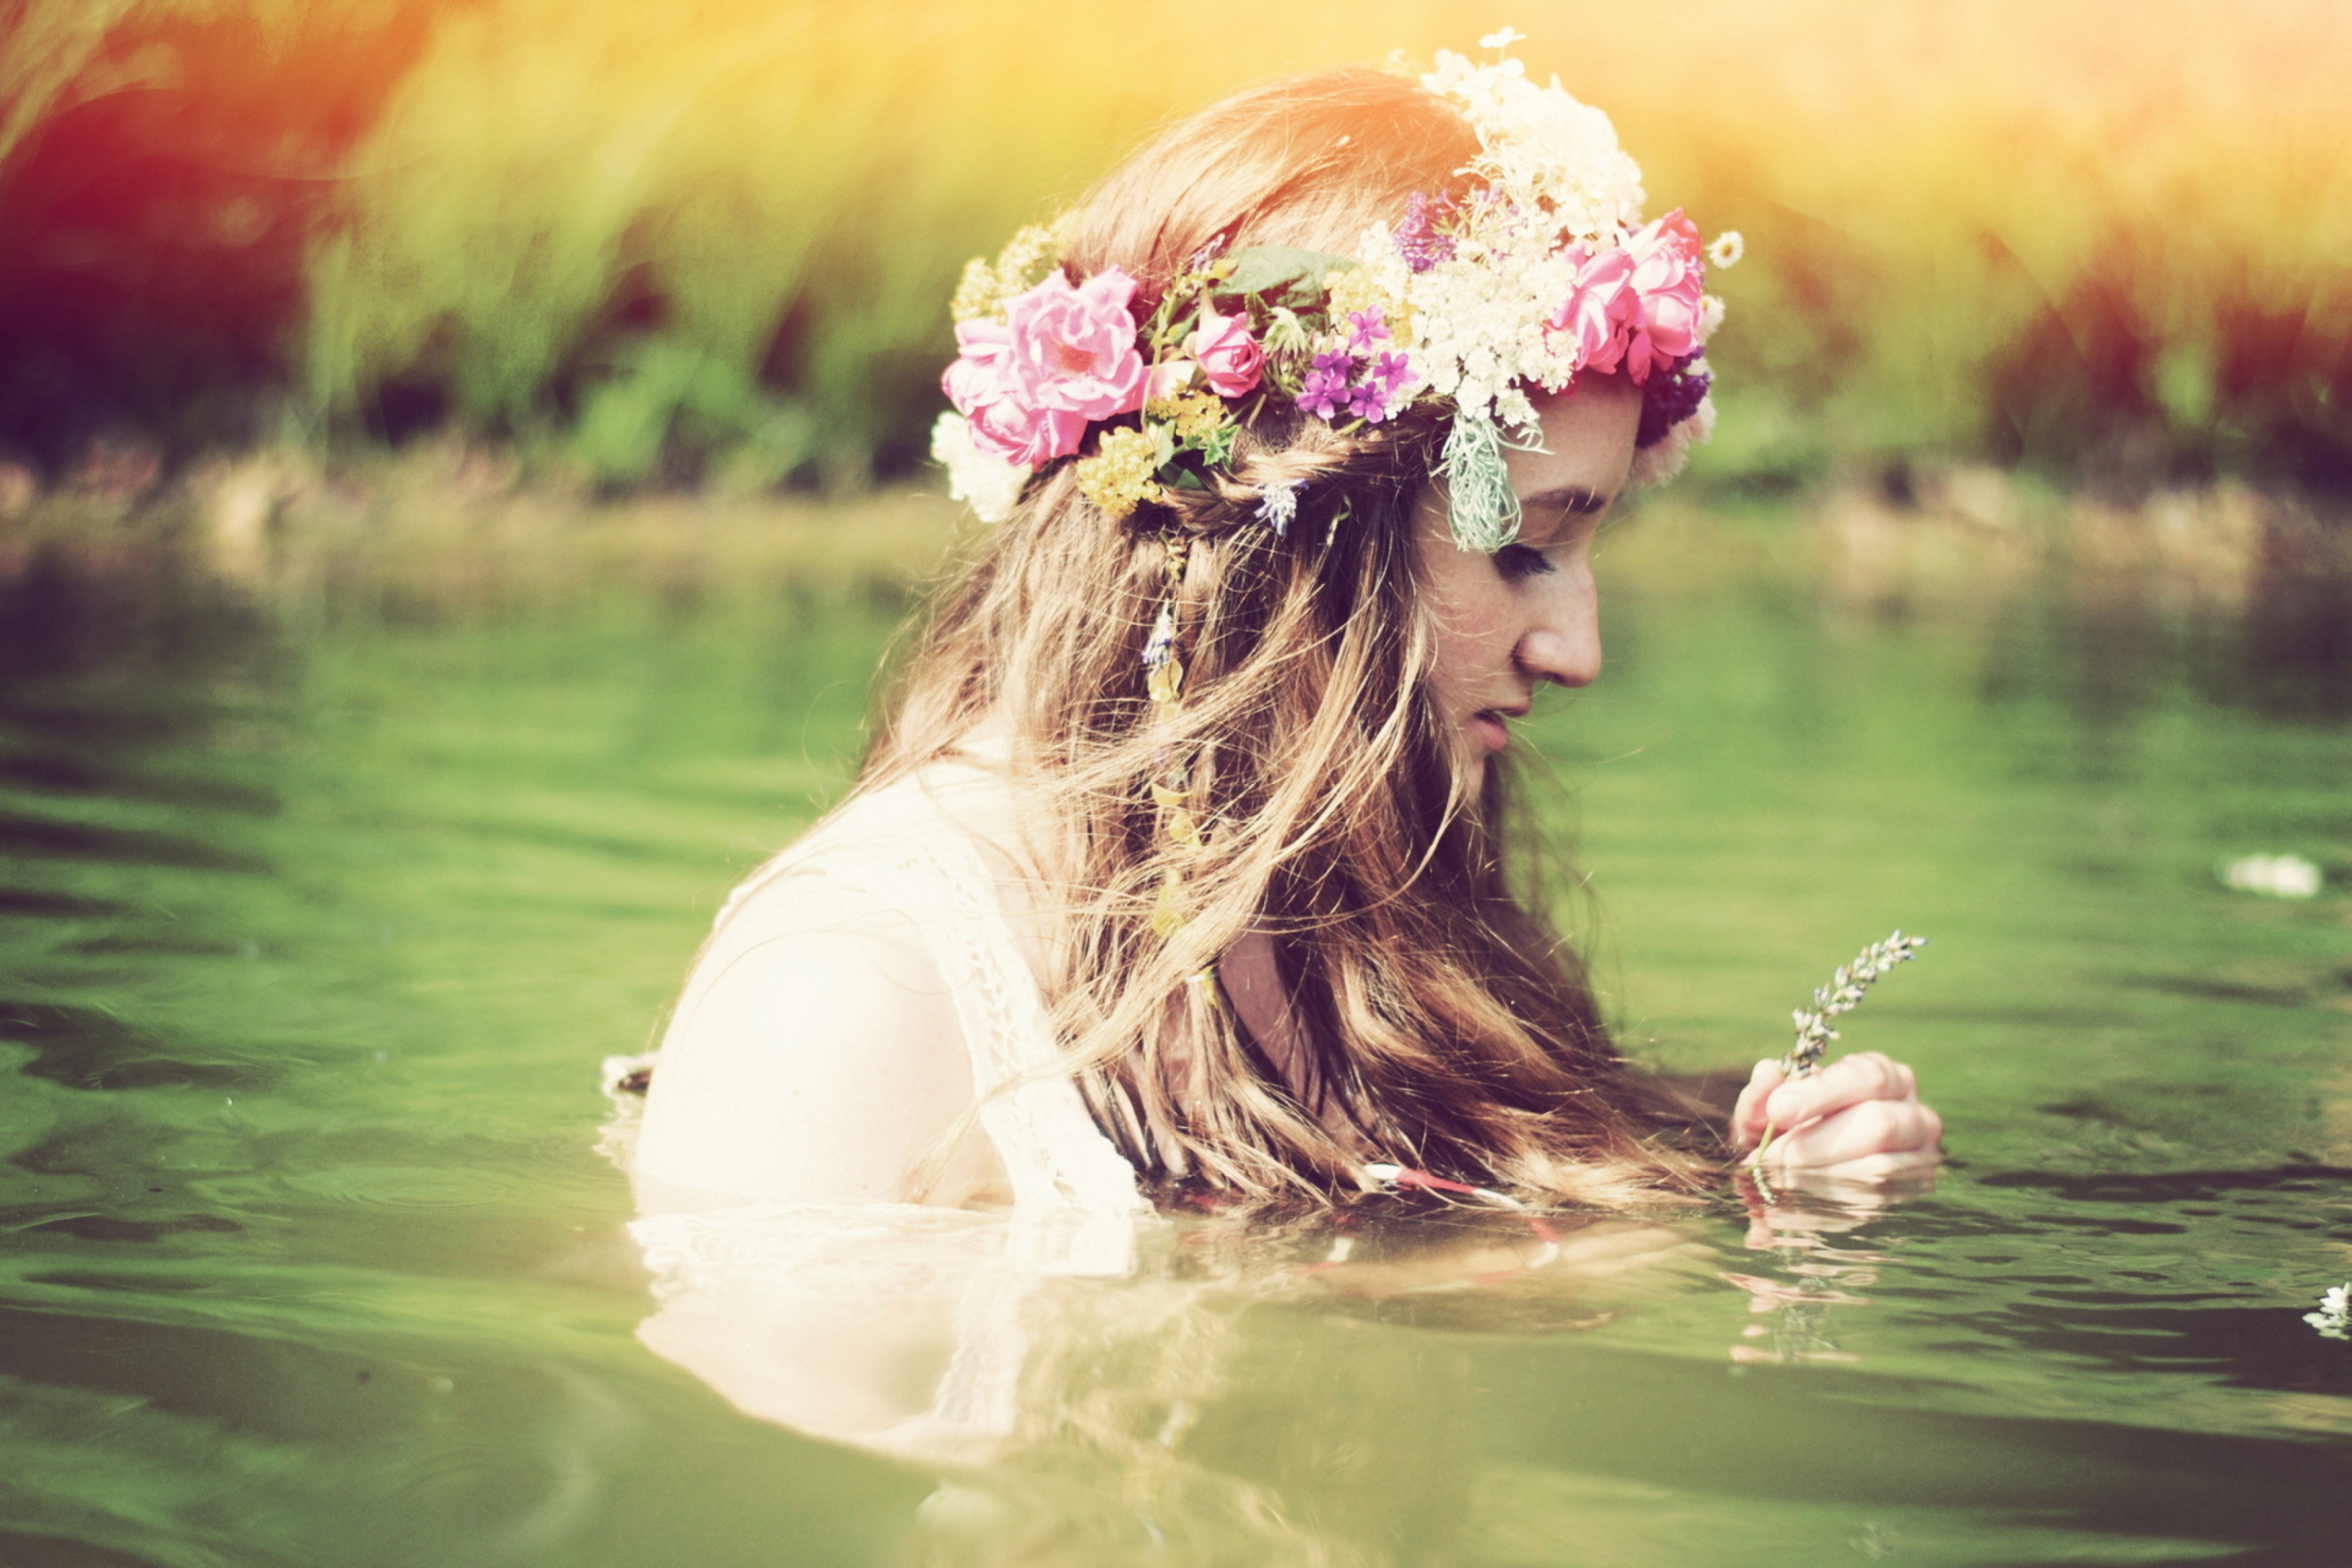 Girl With Flower Crown wallpaper 2880x1920